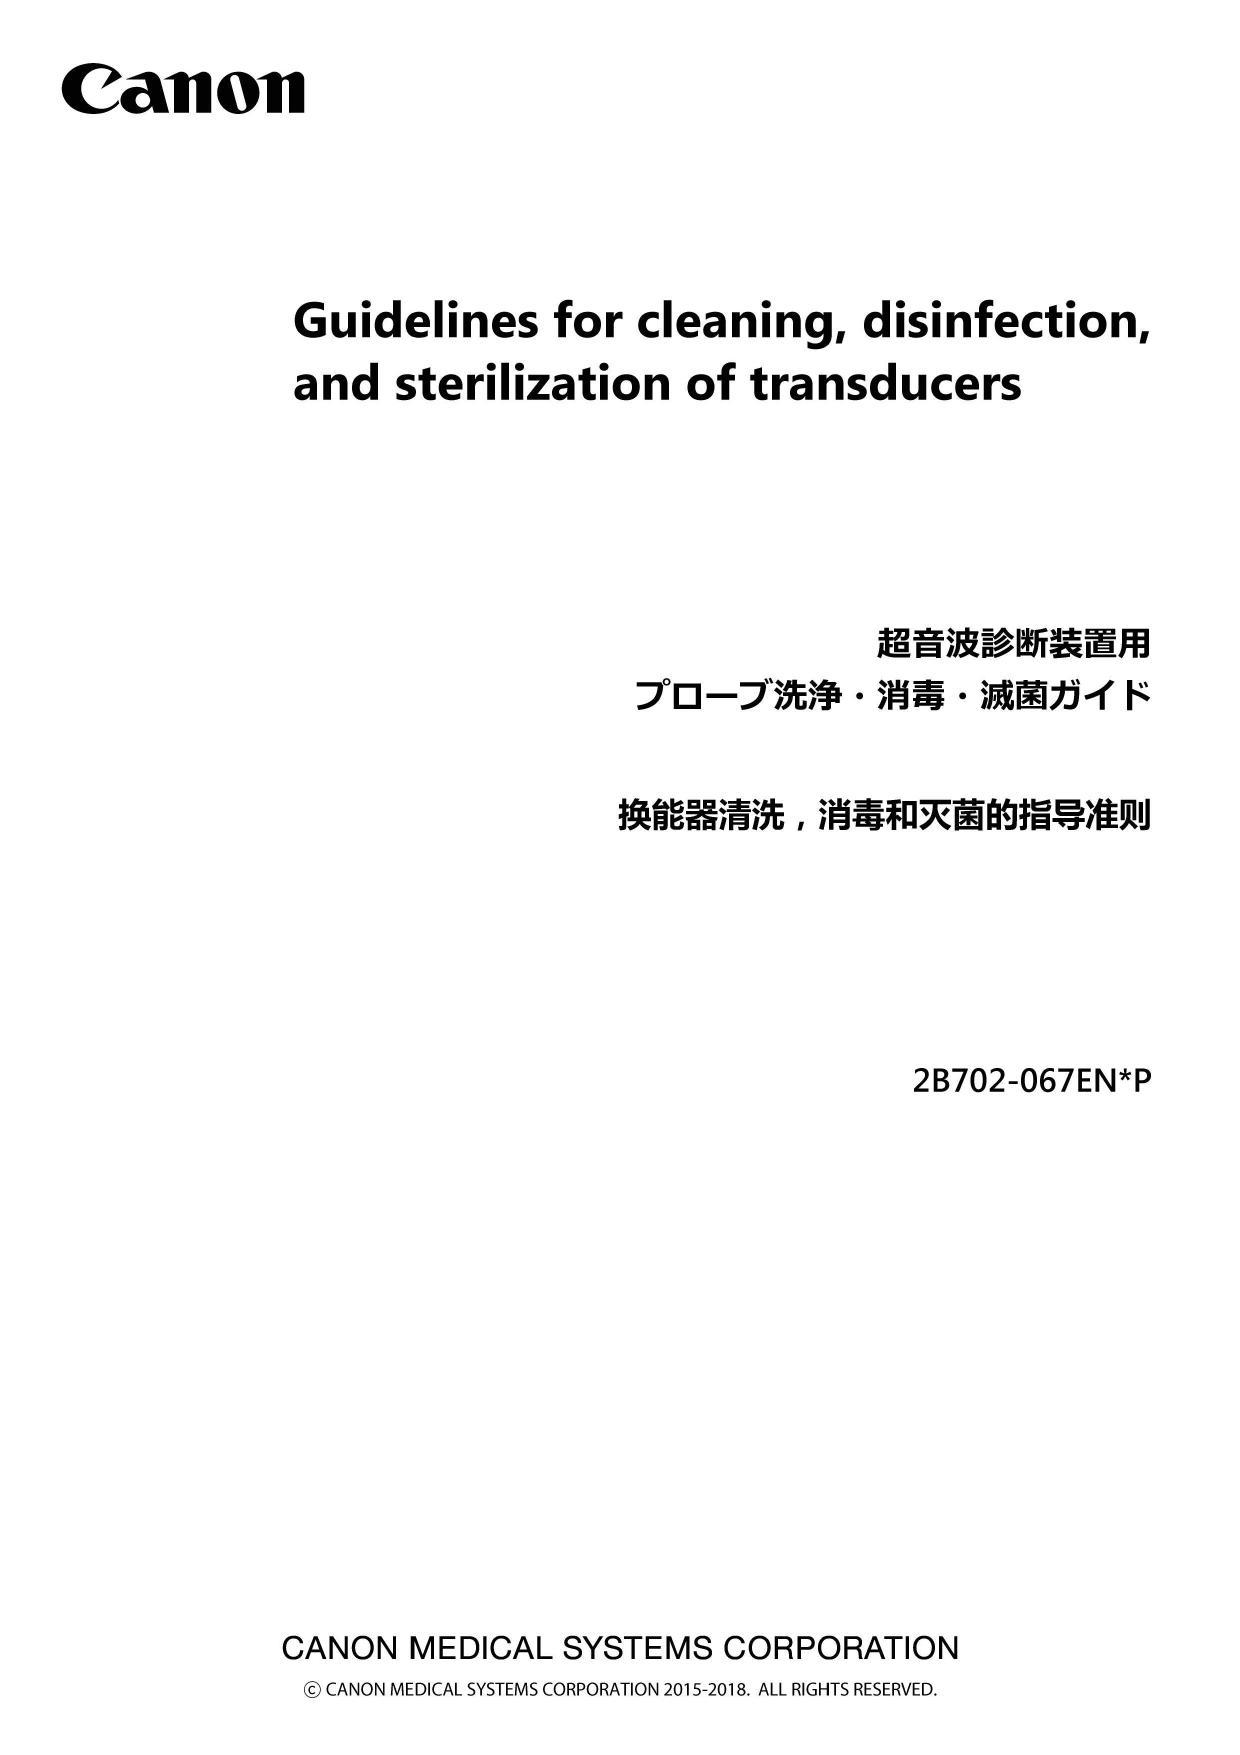 guidelines-for-cleaning-disinfection-and-sterilization-of-transducers.pdf